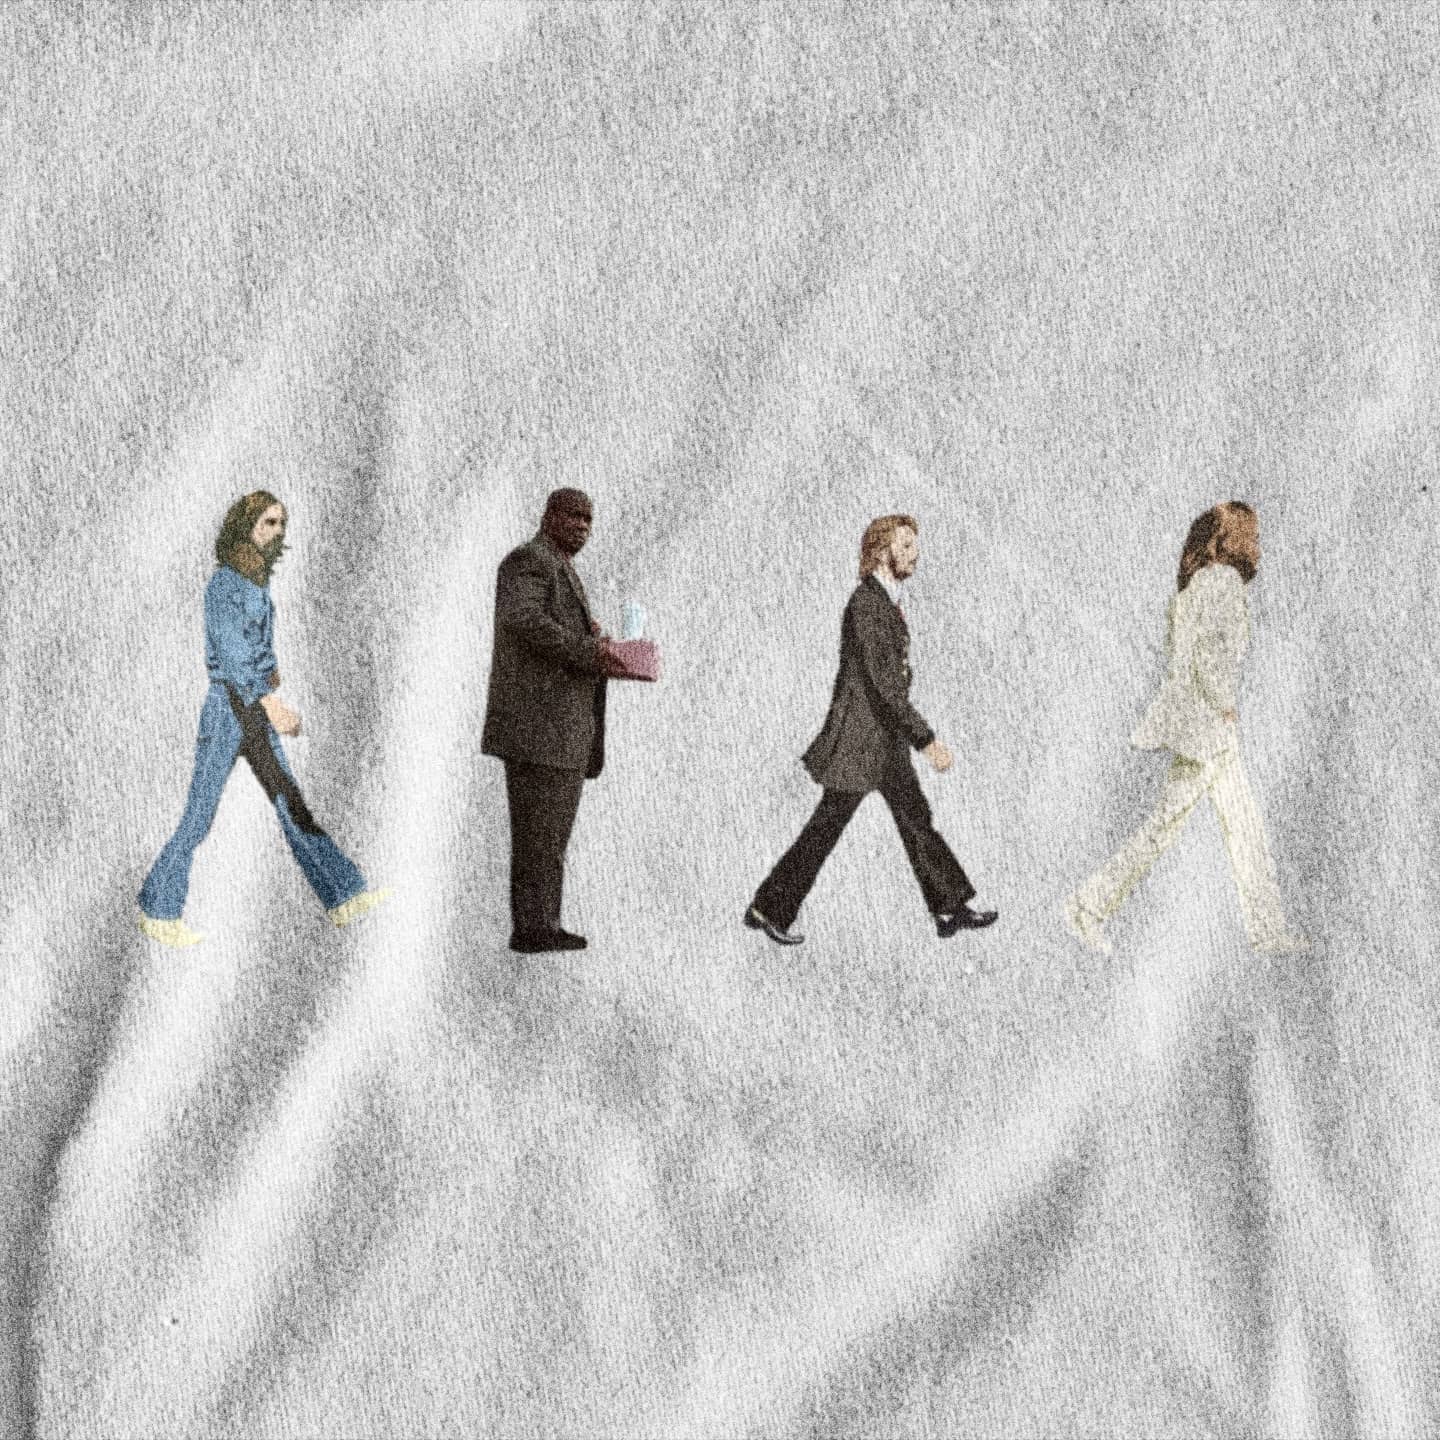 Stylish Marsellus Road T-Shirt depicting a clever twist on Marsellus Wallace from Pulp Fiction